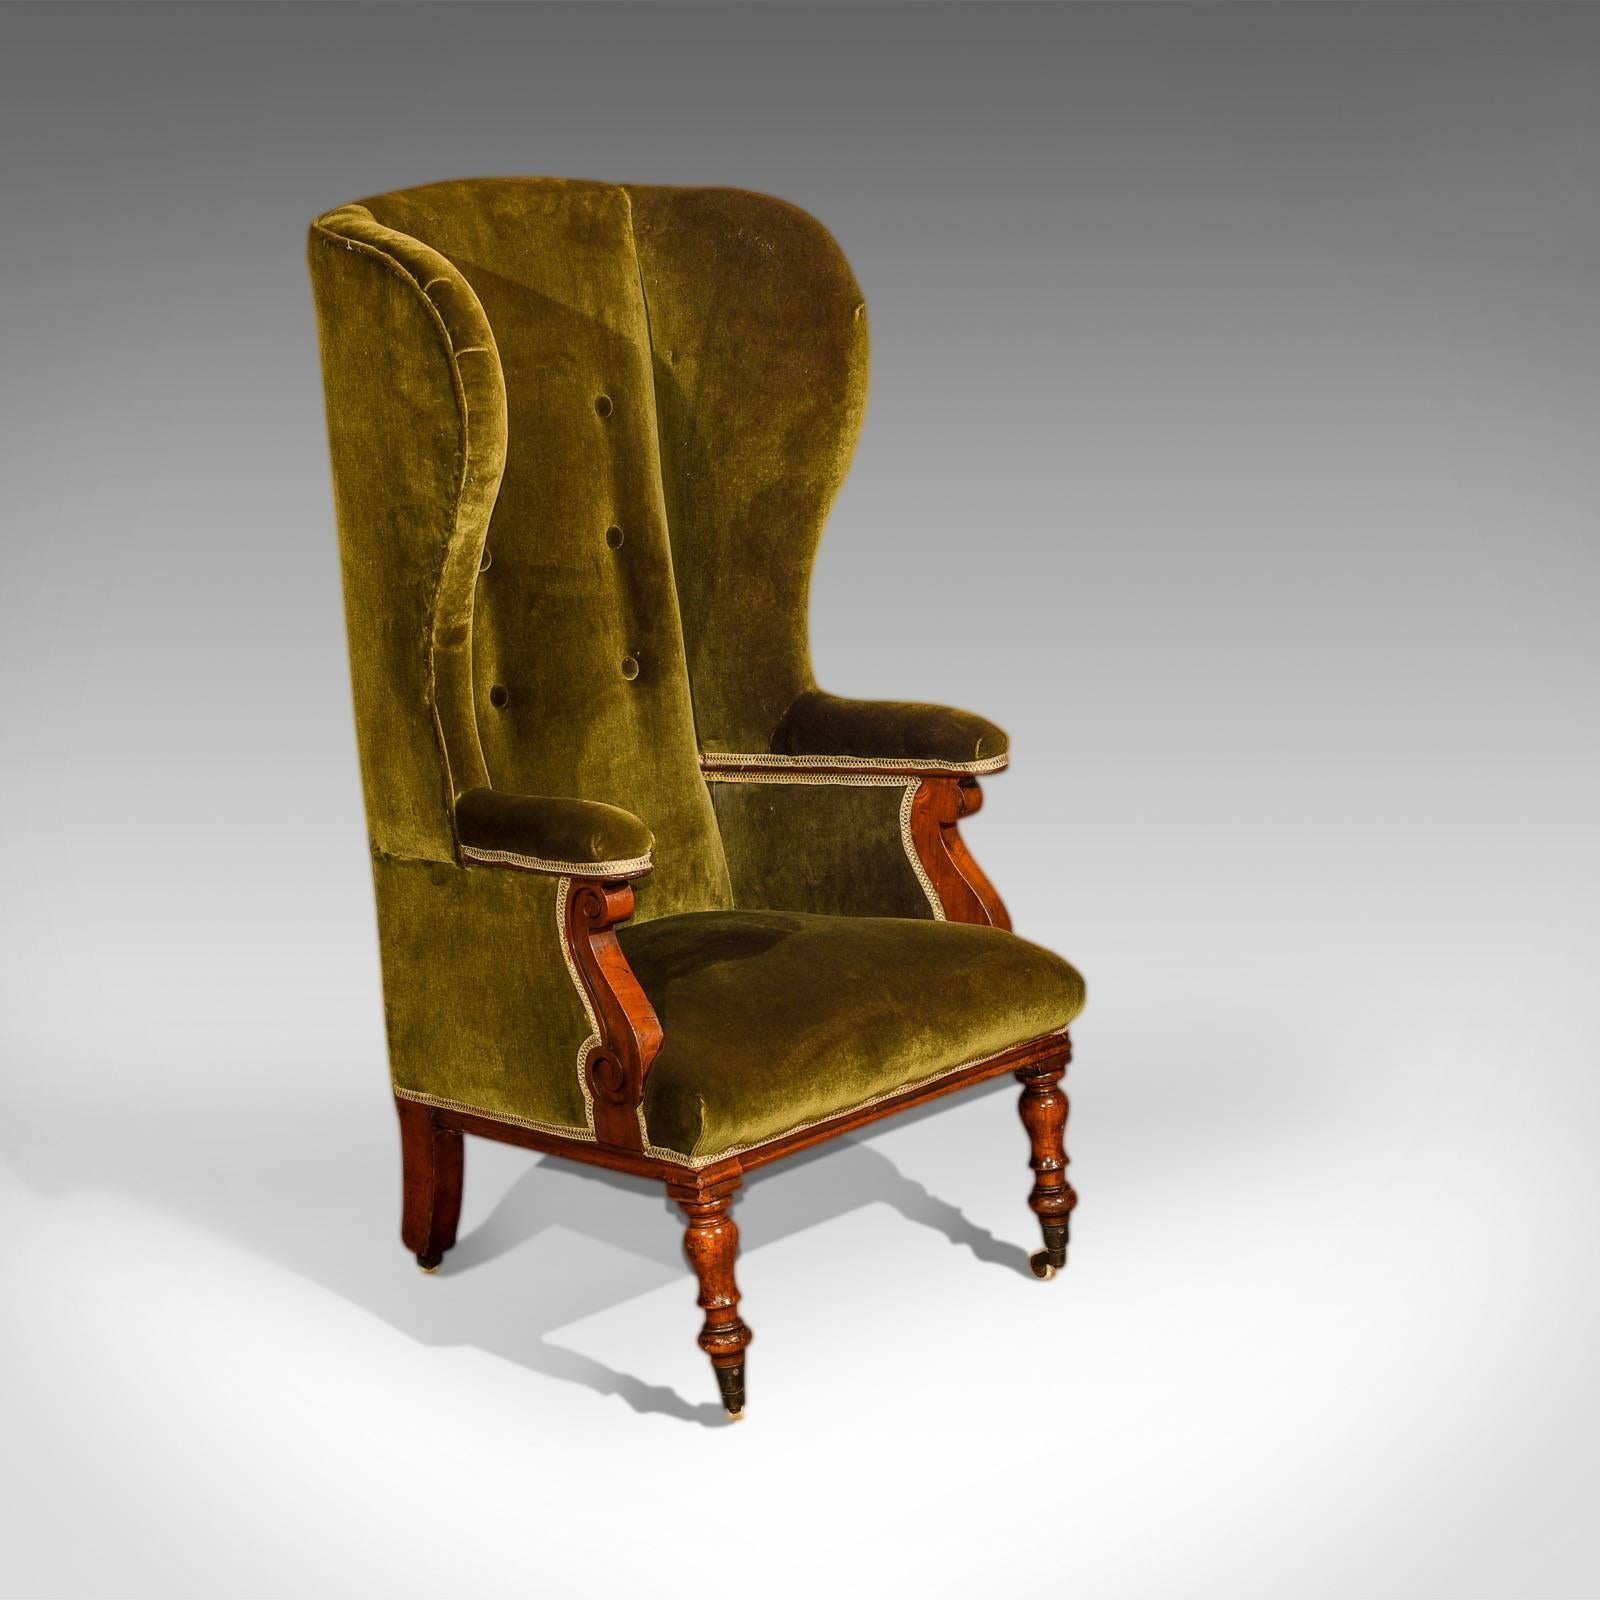 This is a superior quality Victorian antique wing back chair dating to c.1850.

At four feet tall, the high back on this winged chair would have been used to protect against draughts either fire side or as a porter's chair.

Raised on raked,